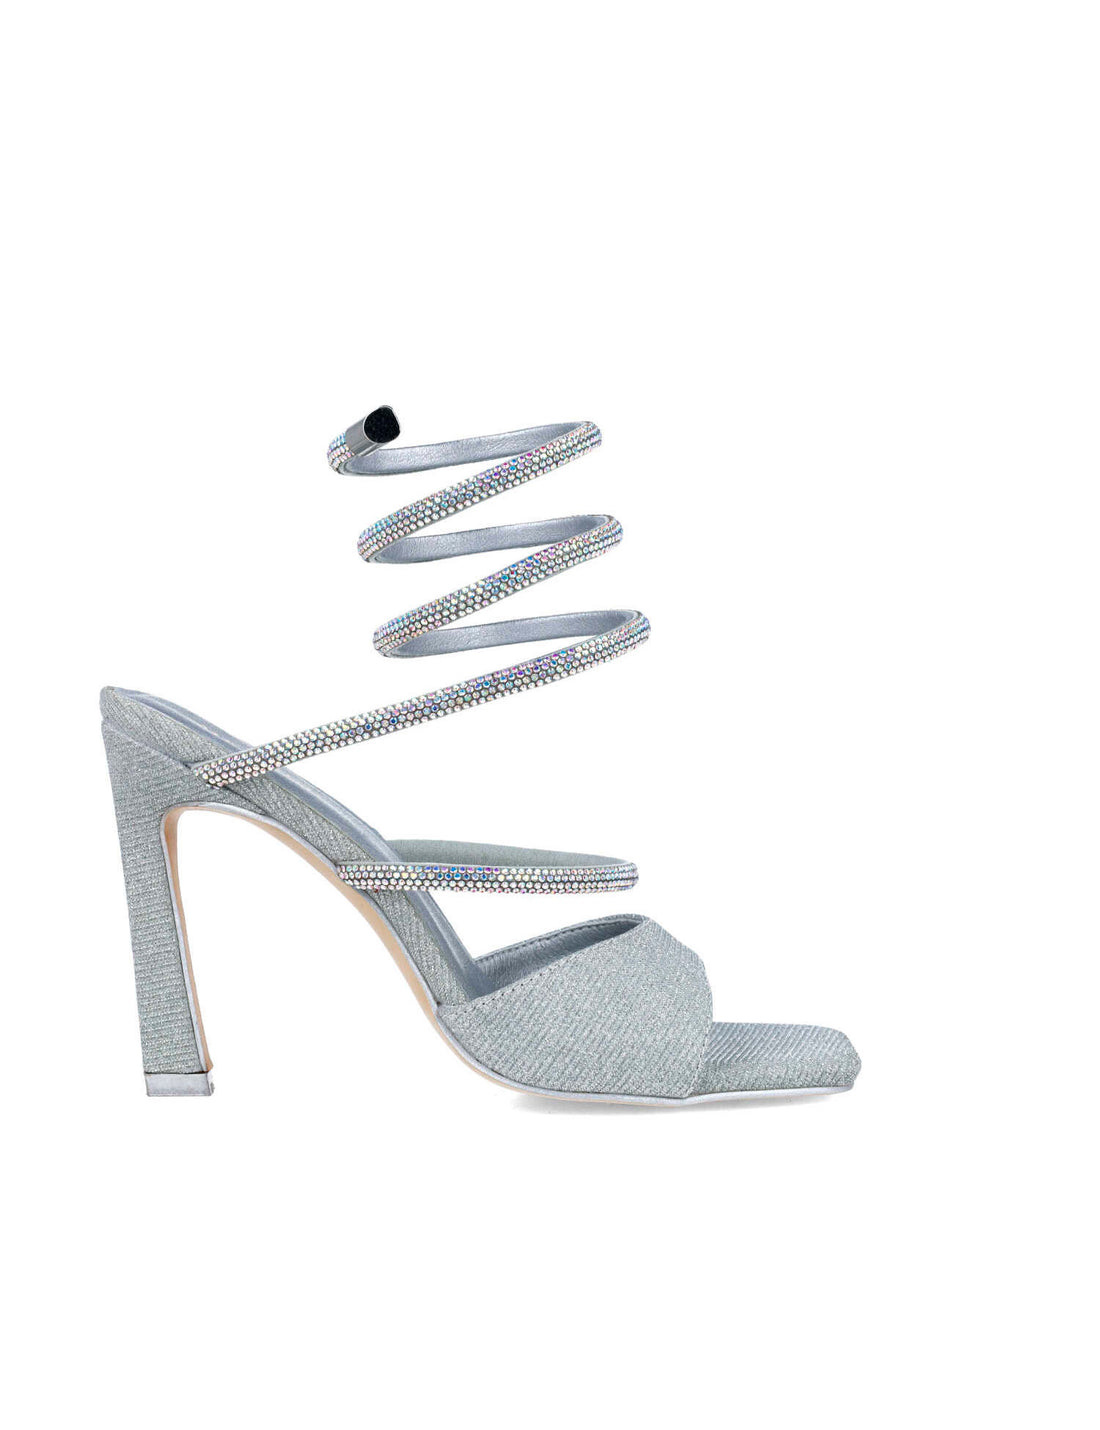 Silver Sandals With Embellished Wrap Strap_24712_09_01